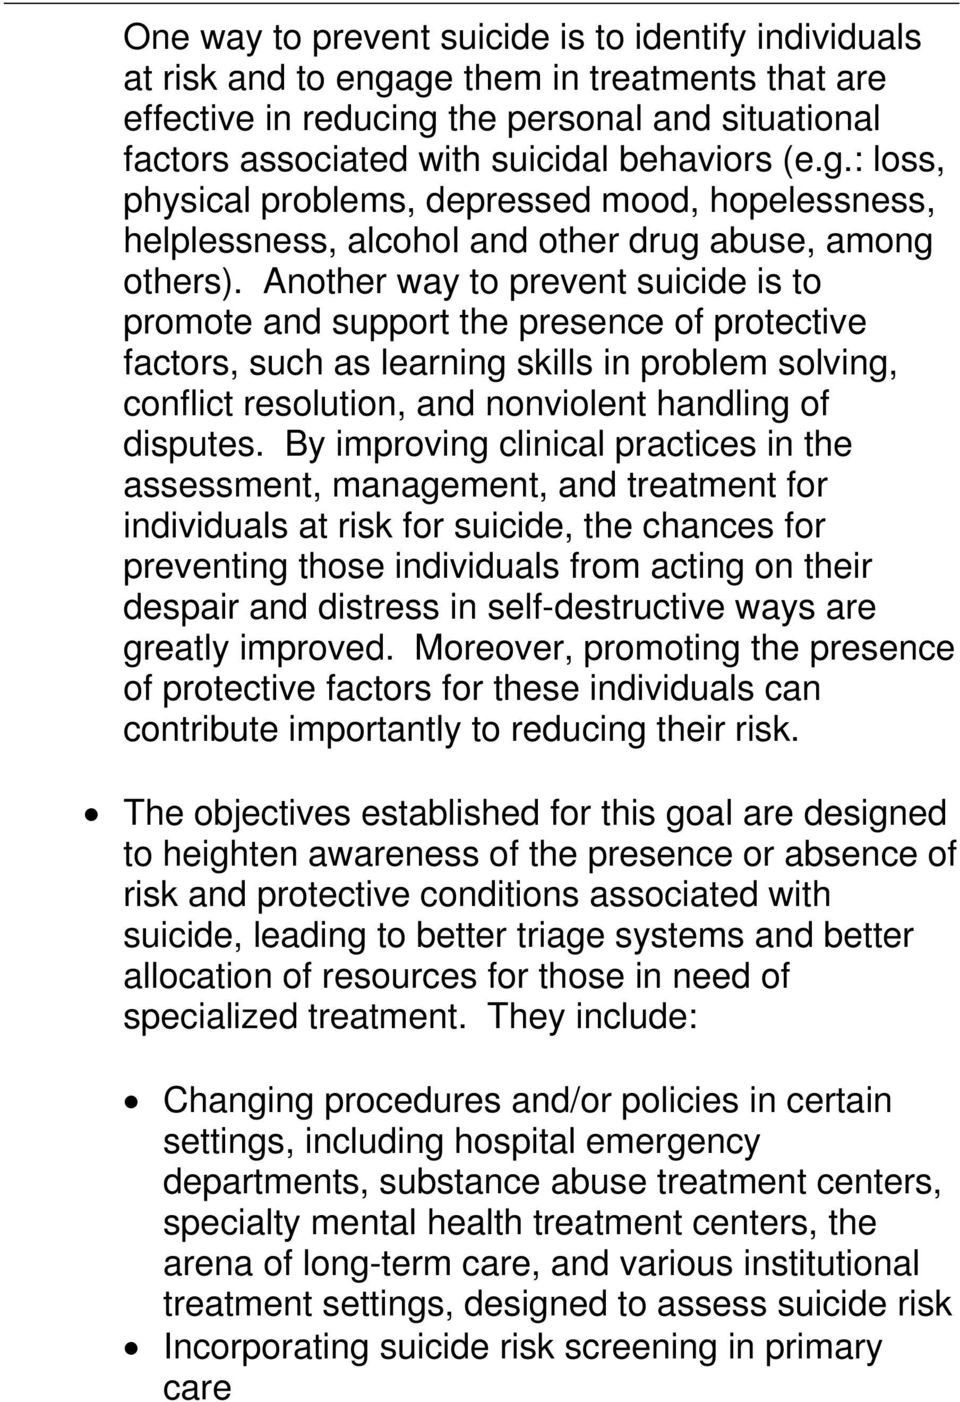 Another way to prevent suicide is to promote and support the presence of protective factors, such as learning skills in problem solving, conflict resolution, and nonviolent handling of disputes.